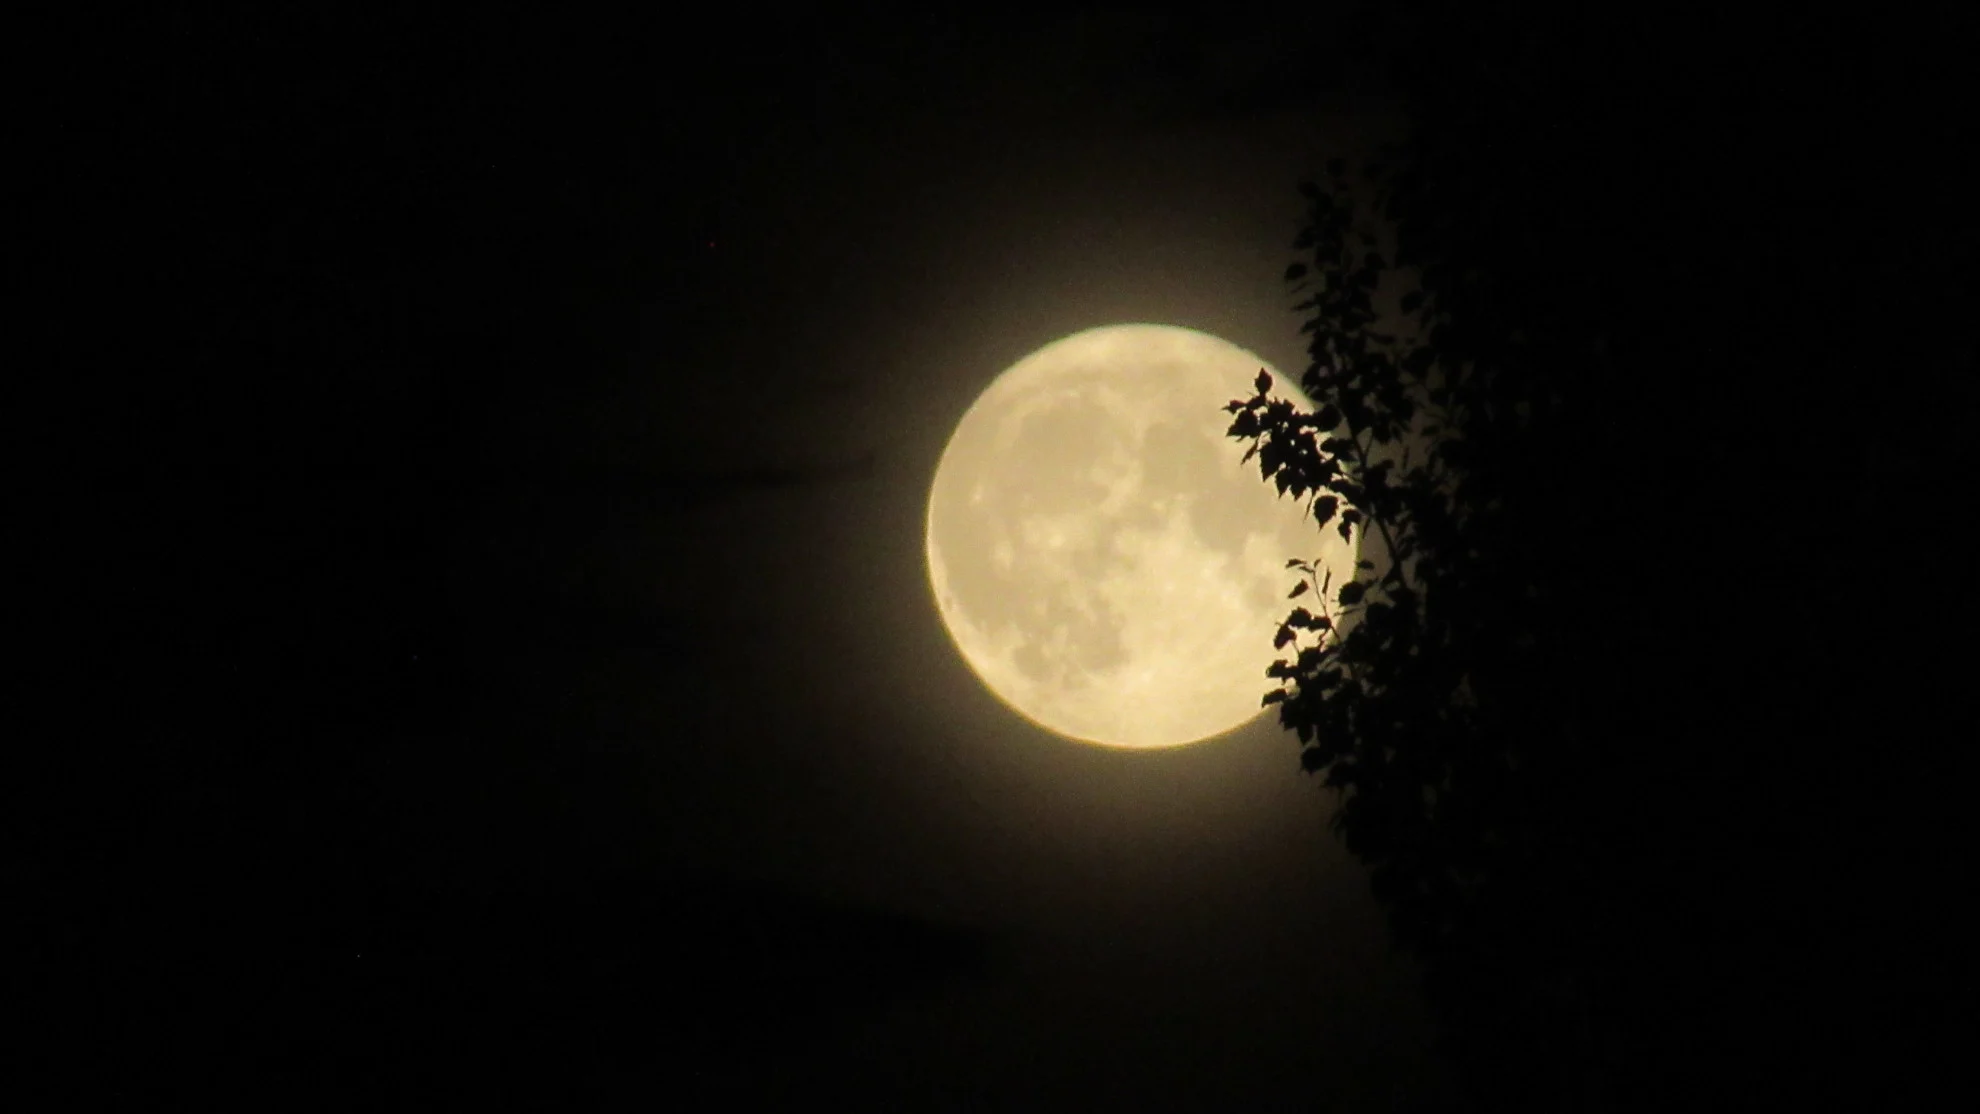 Look up! The first of two August Full Moons rises tonight!